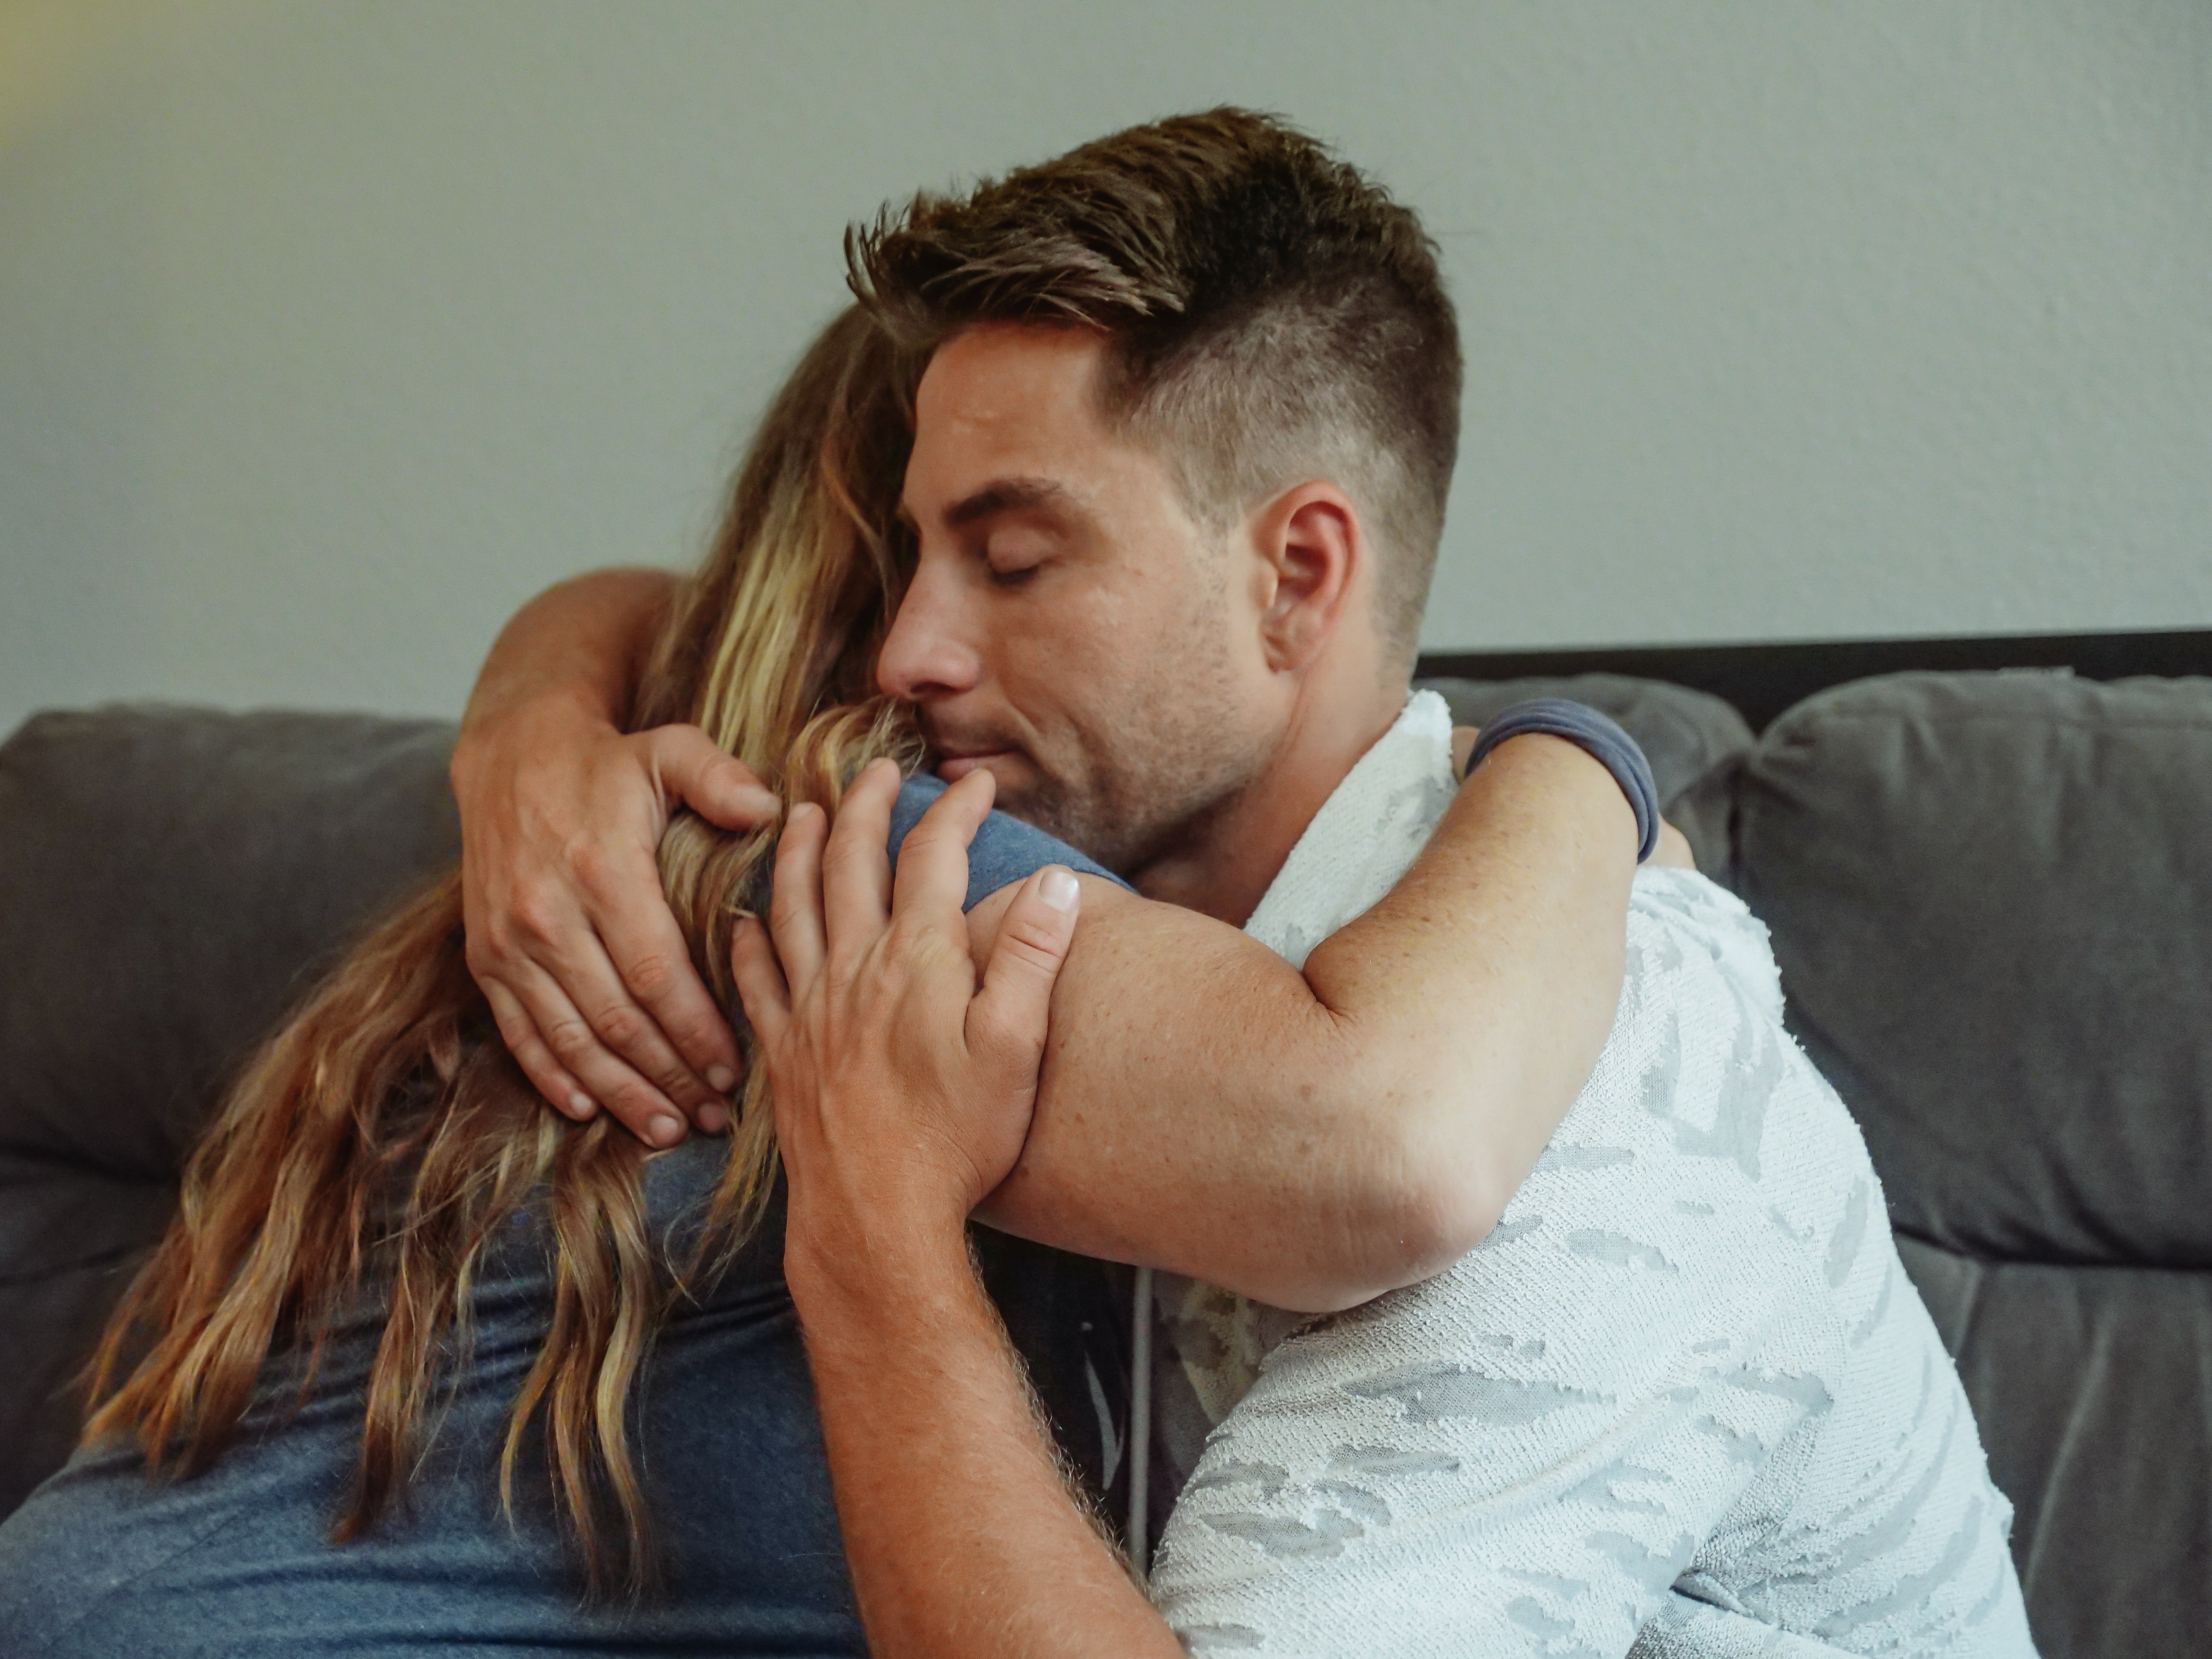 Jack and Amanda hugged after which Jack gave her the gift he got her, which was a watch | Source: Pexels